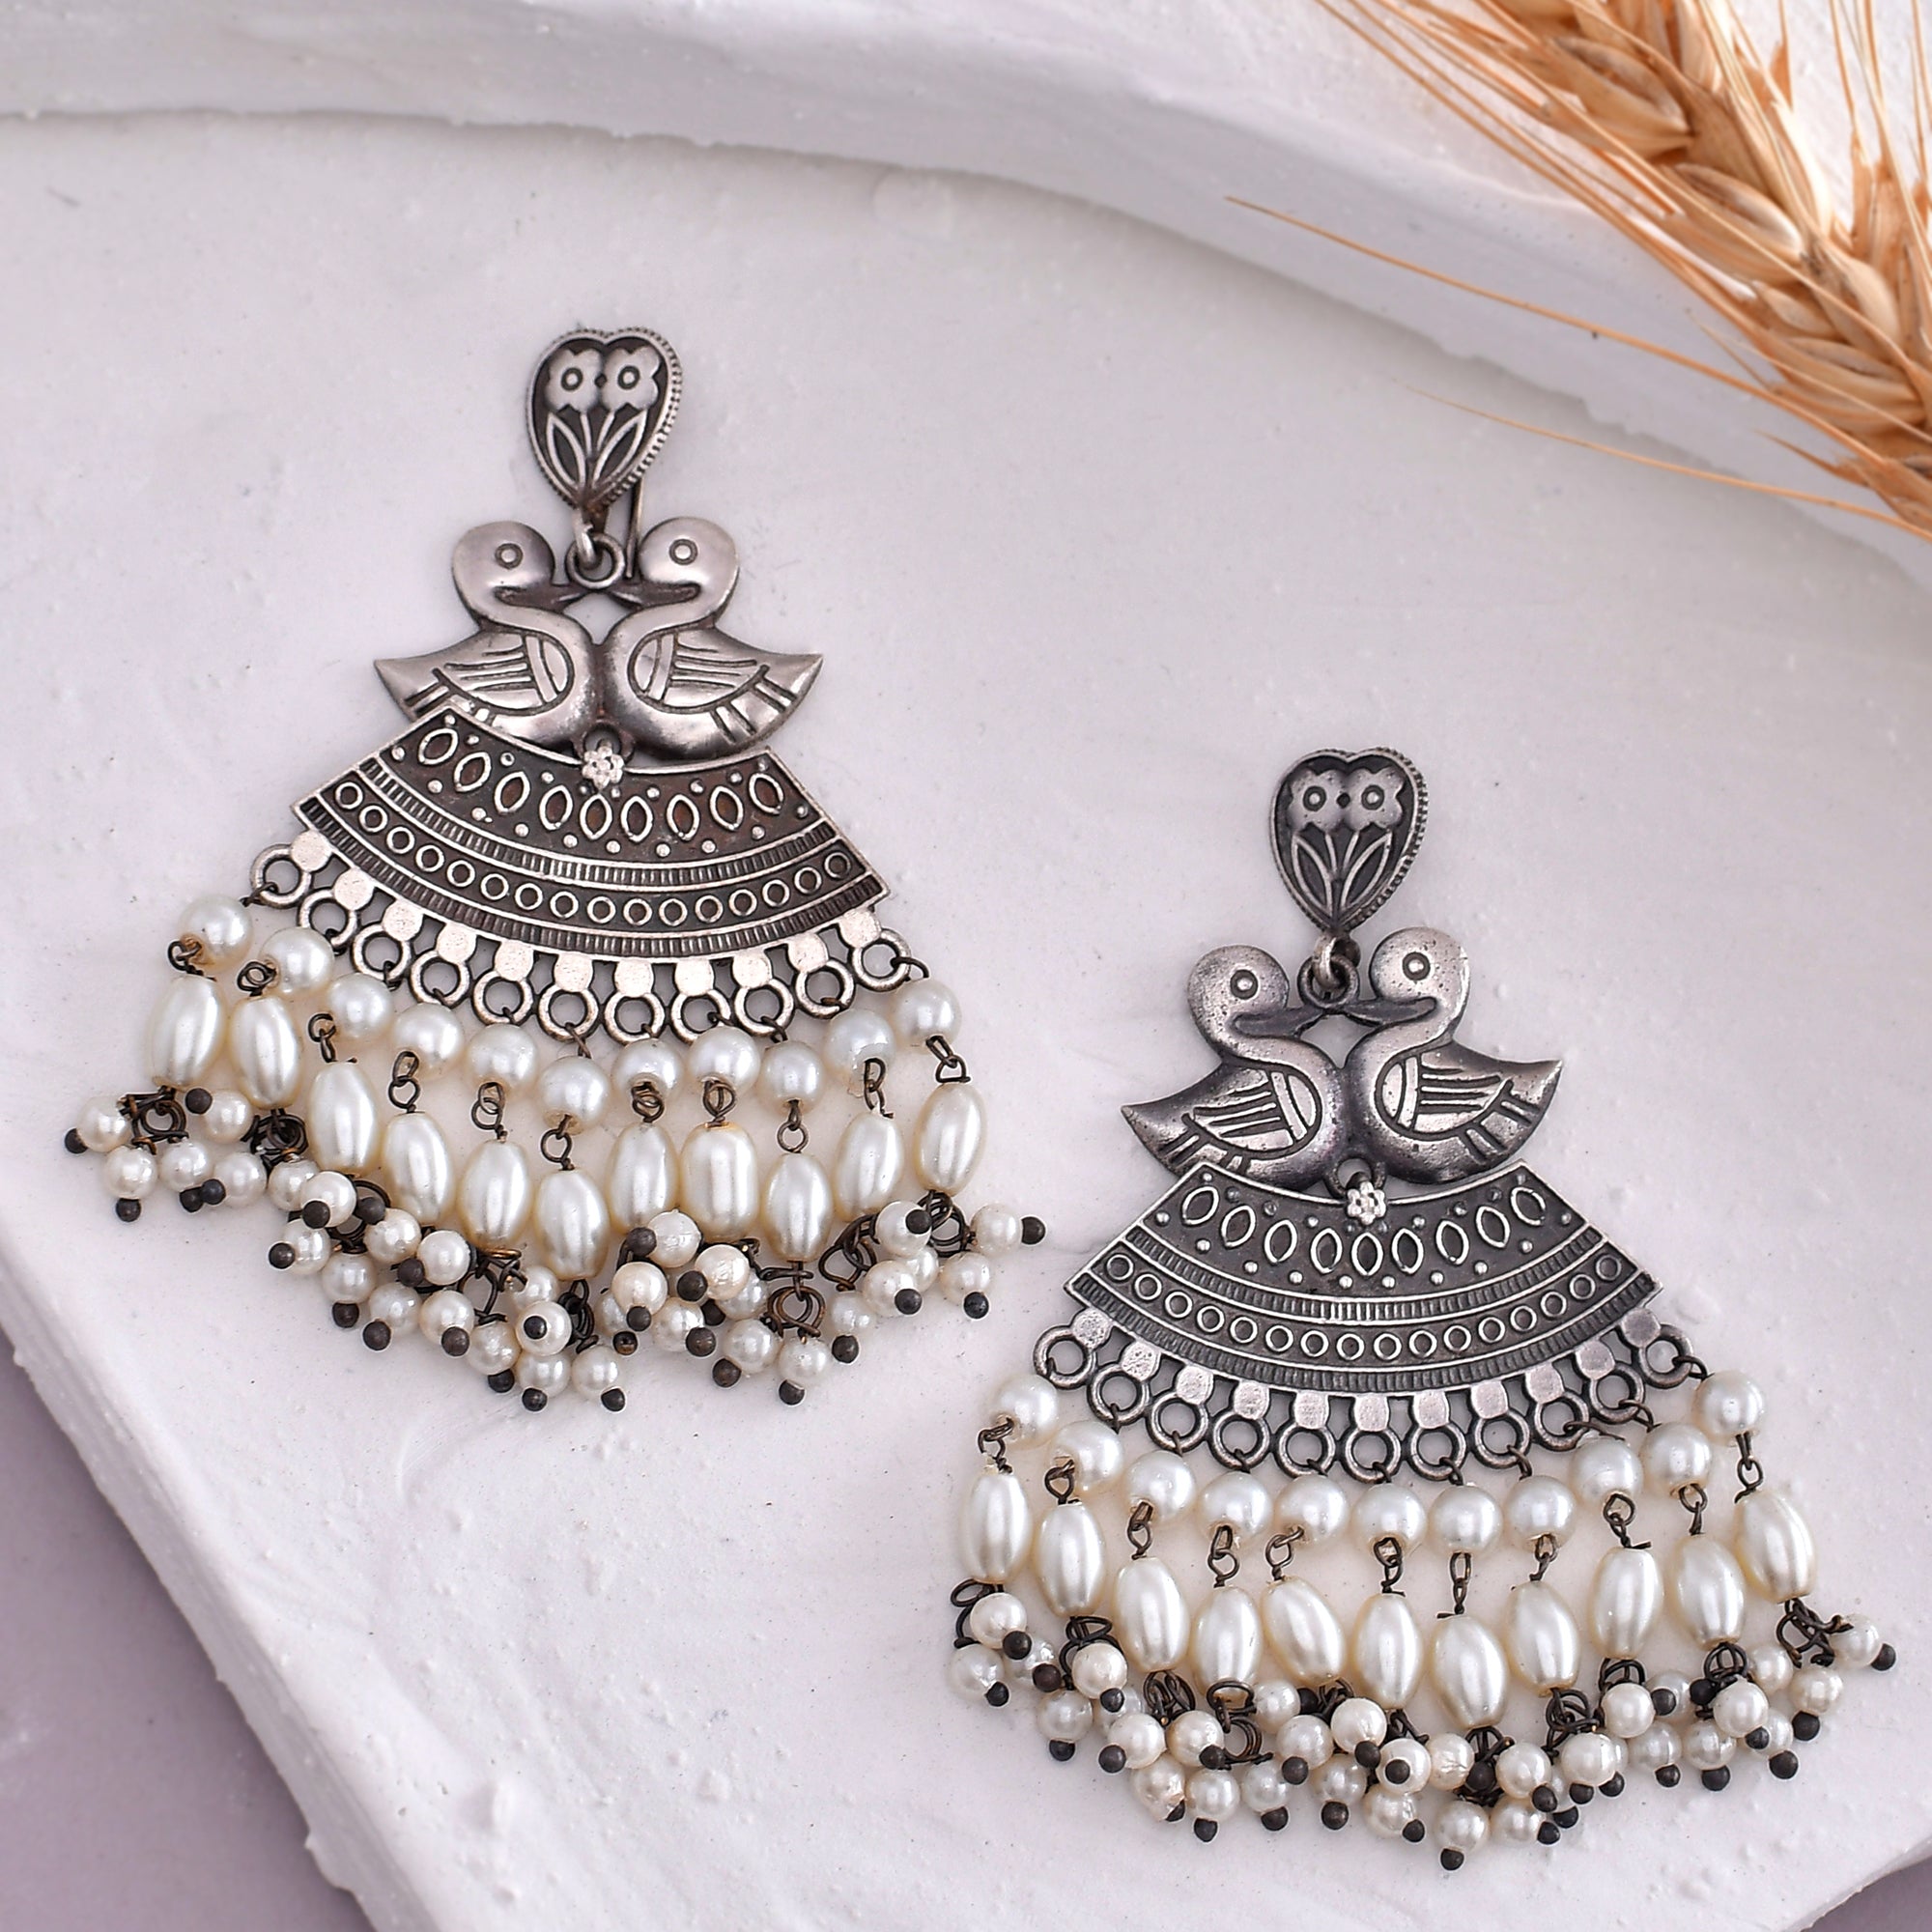 Antique Elegance Peacock Motifs Faux Pearls Adorned Brass Oxidized Silver Plated Earrings